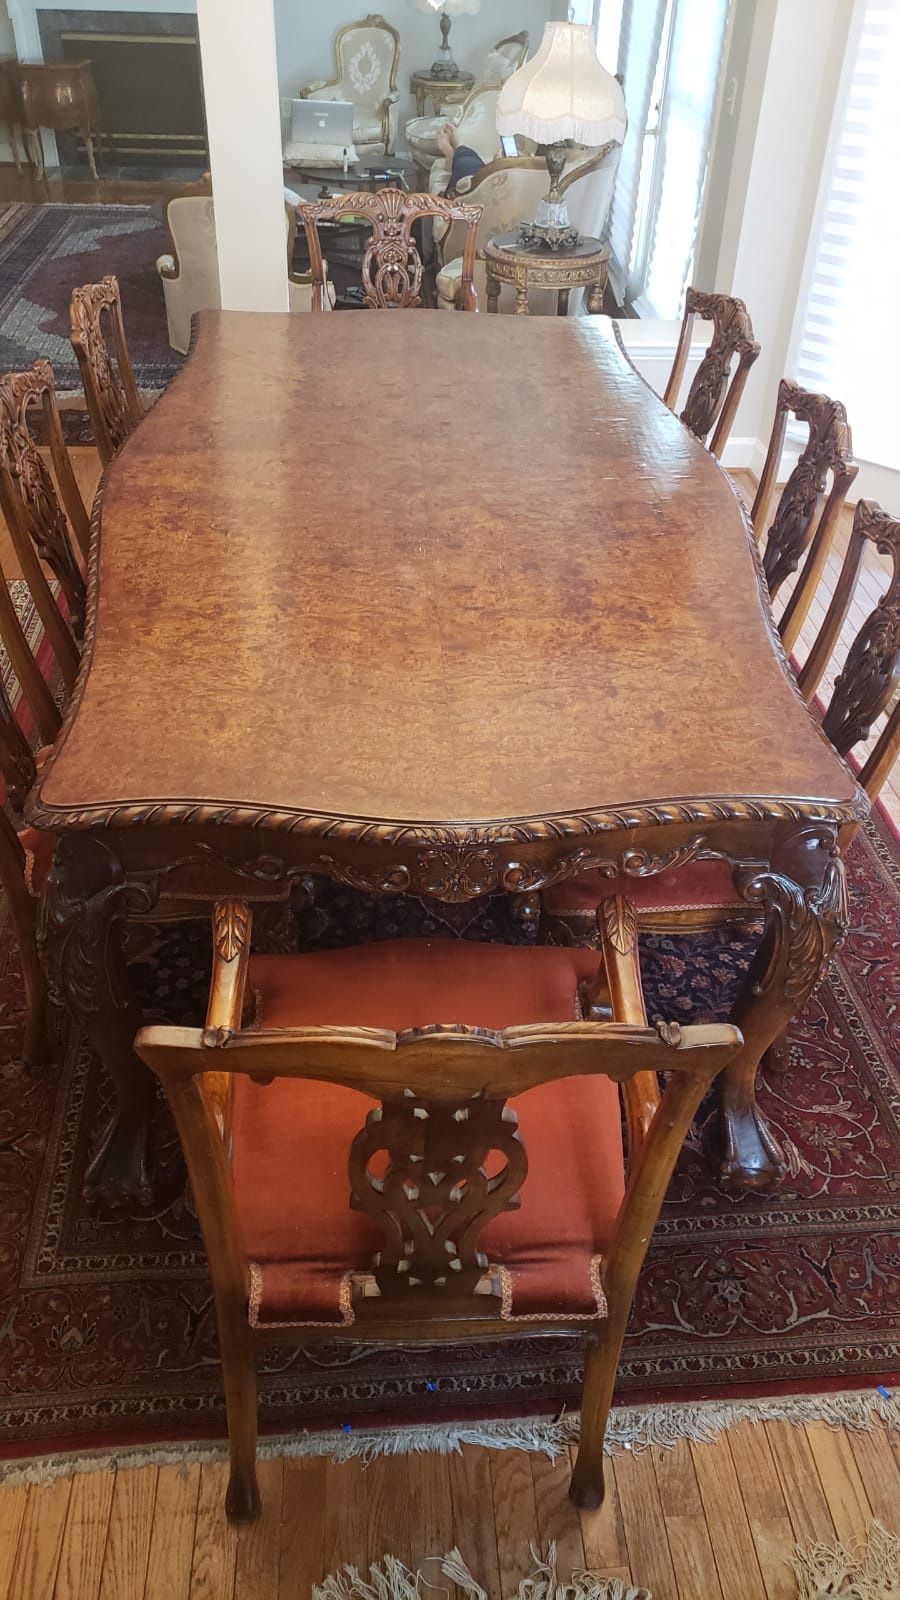 English Dinning room table with chairs